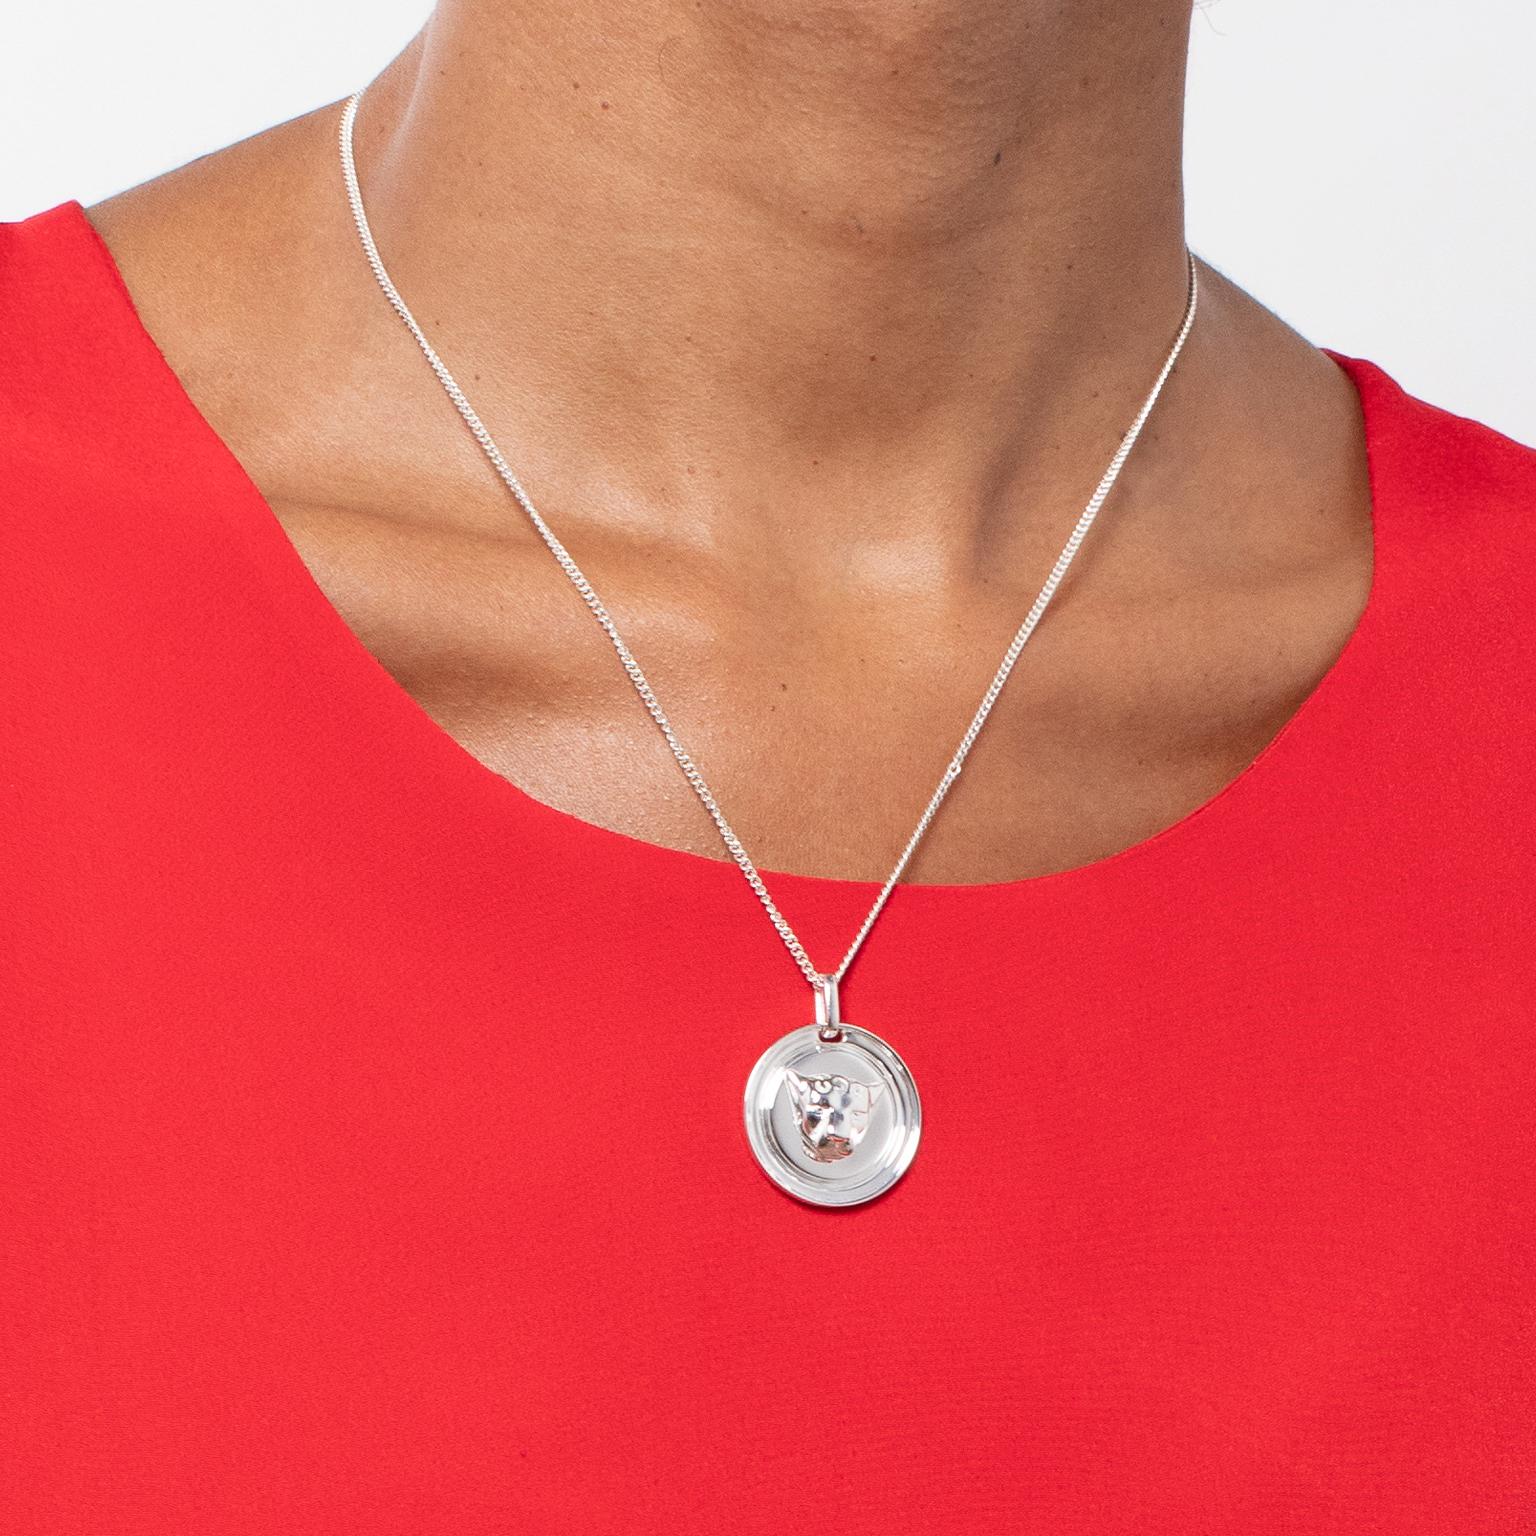 The Jaguar Medal Pendant from the Animal´s Collection by TANE is made in silver .925. From its coin shape, emerges the one of a jaguar's head with spots in relief, harmoniously distributed along its surface. The pendant is suspended from a 1.77¨